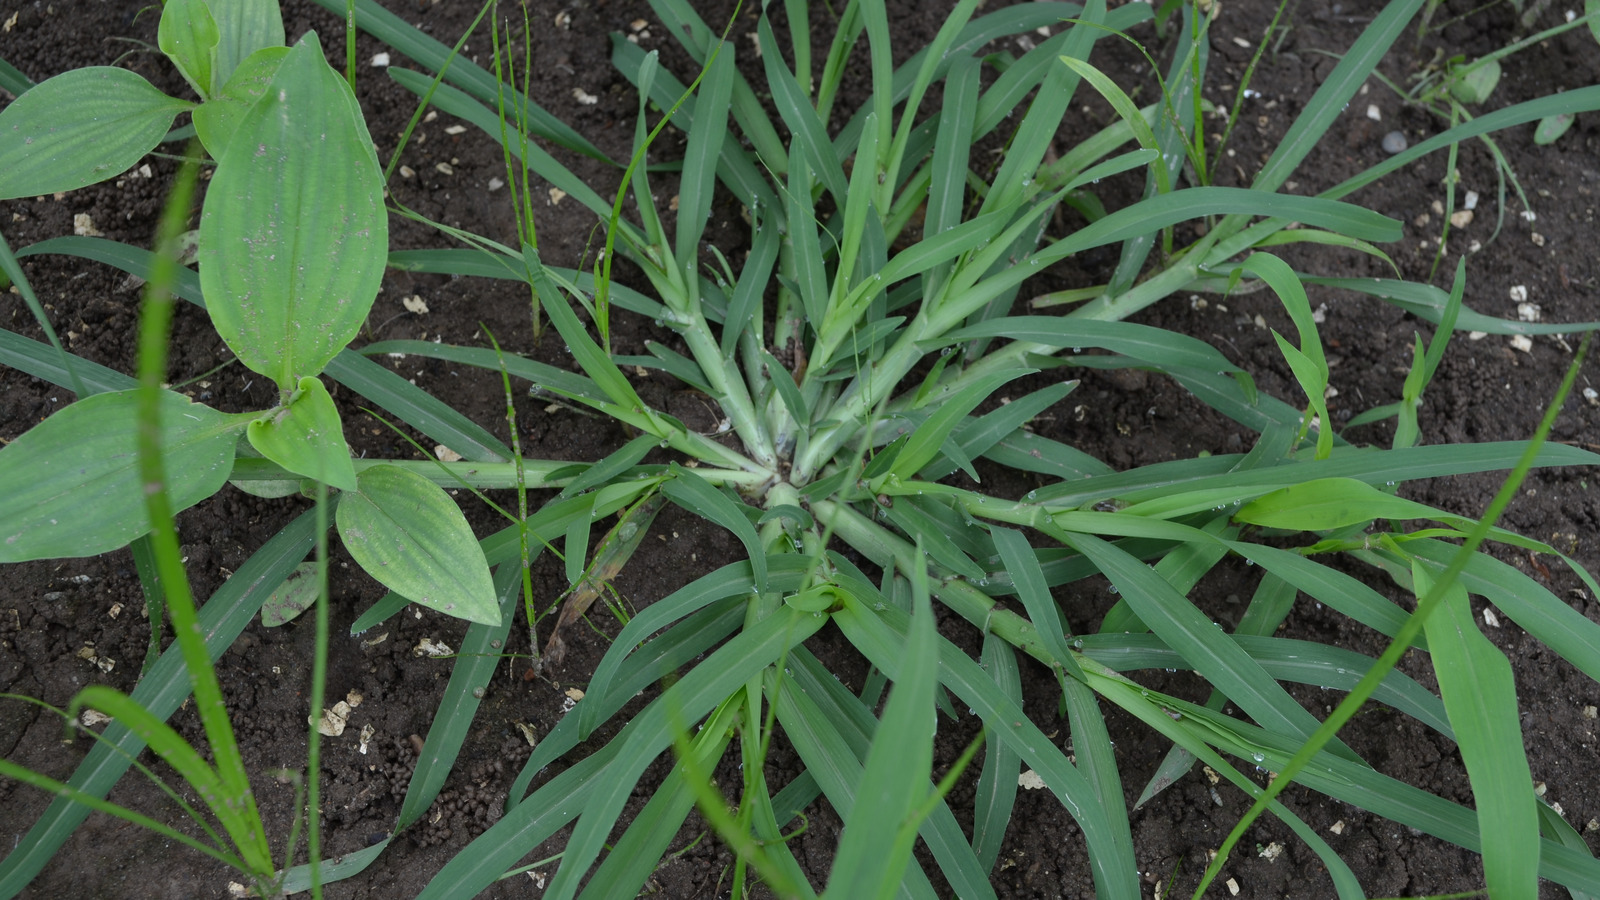 When Is The Best Time To Put Down Crabgrass Preventer?